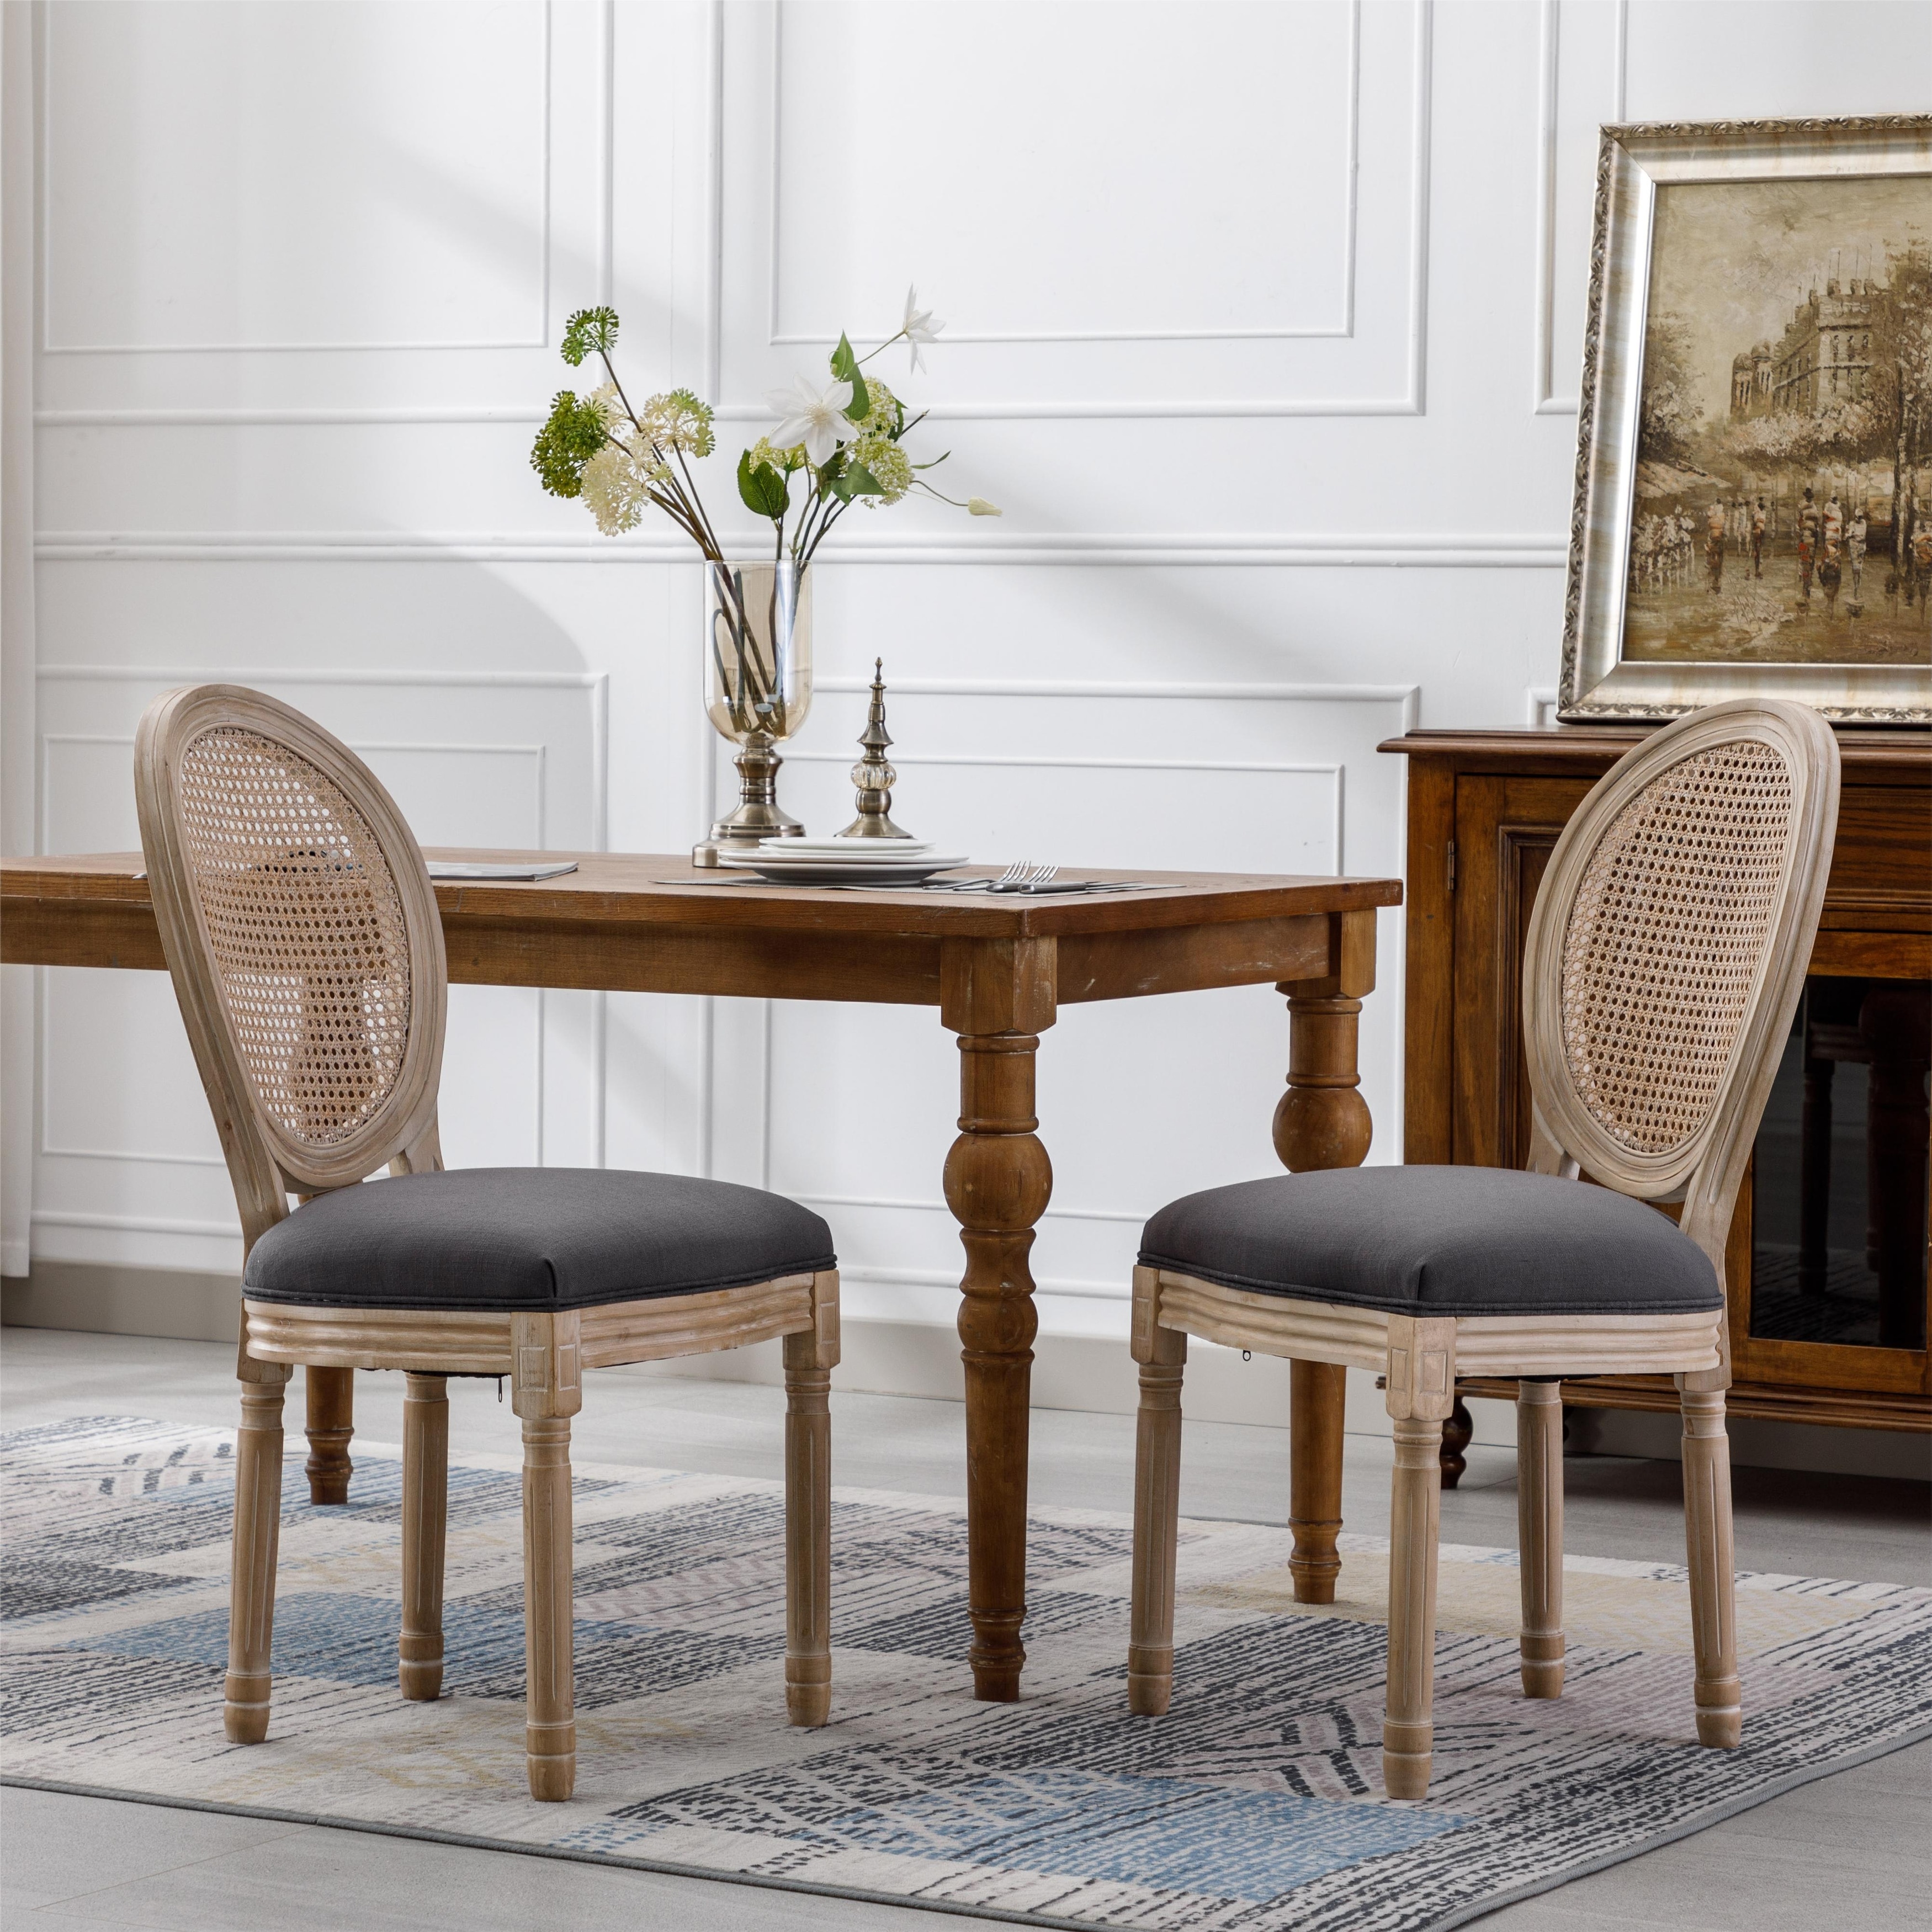 French Style Round Back Dining Chairs